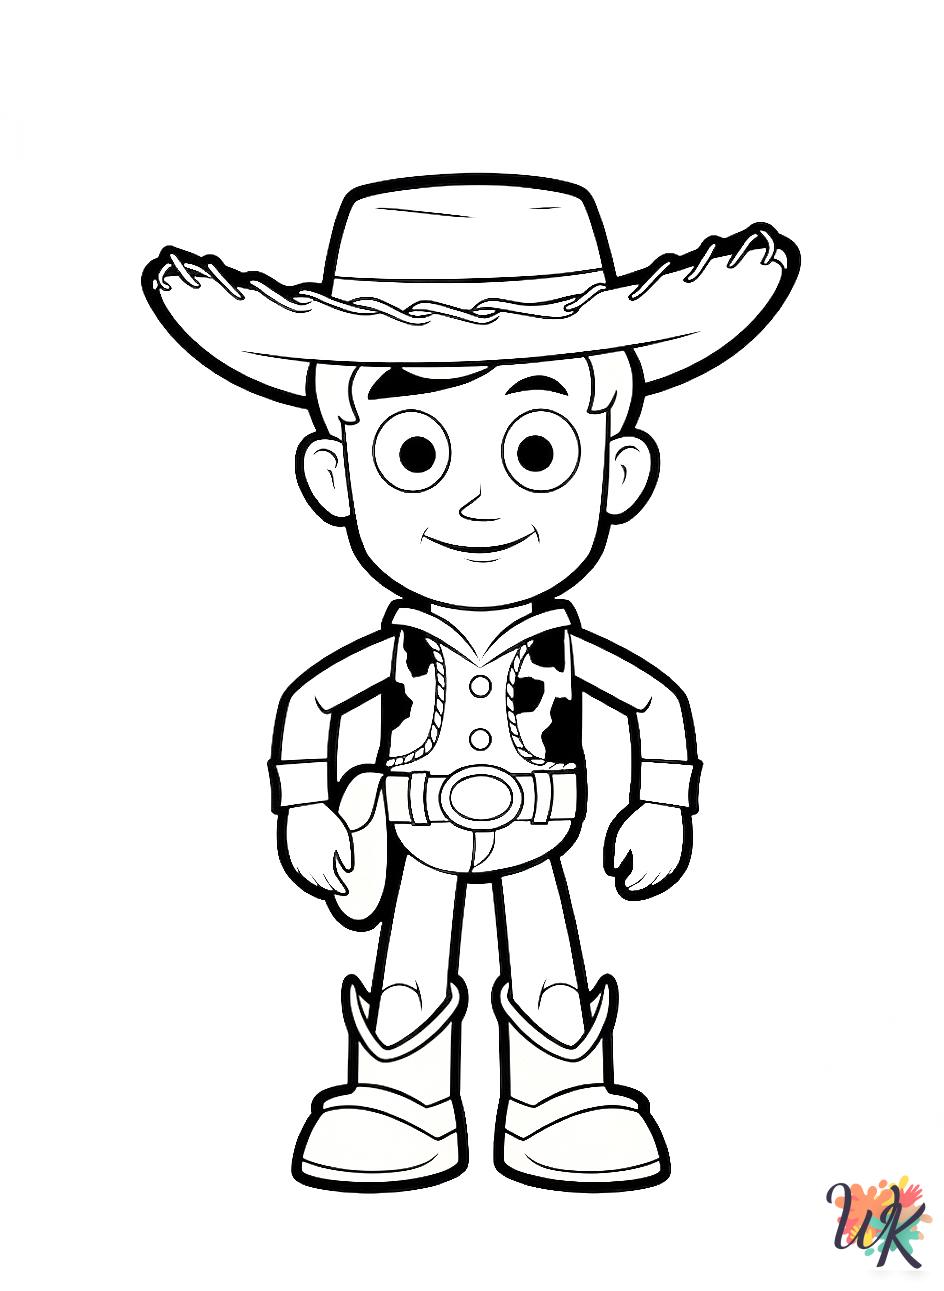 Toy Story adult coloring pages